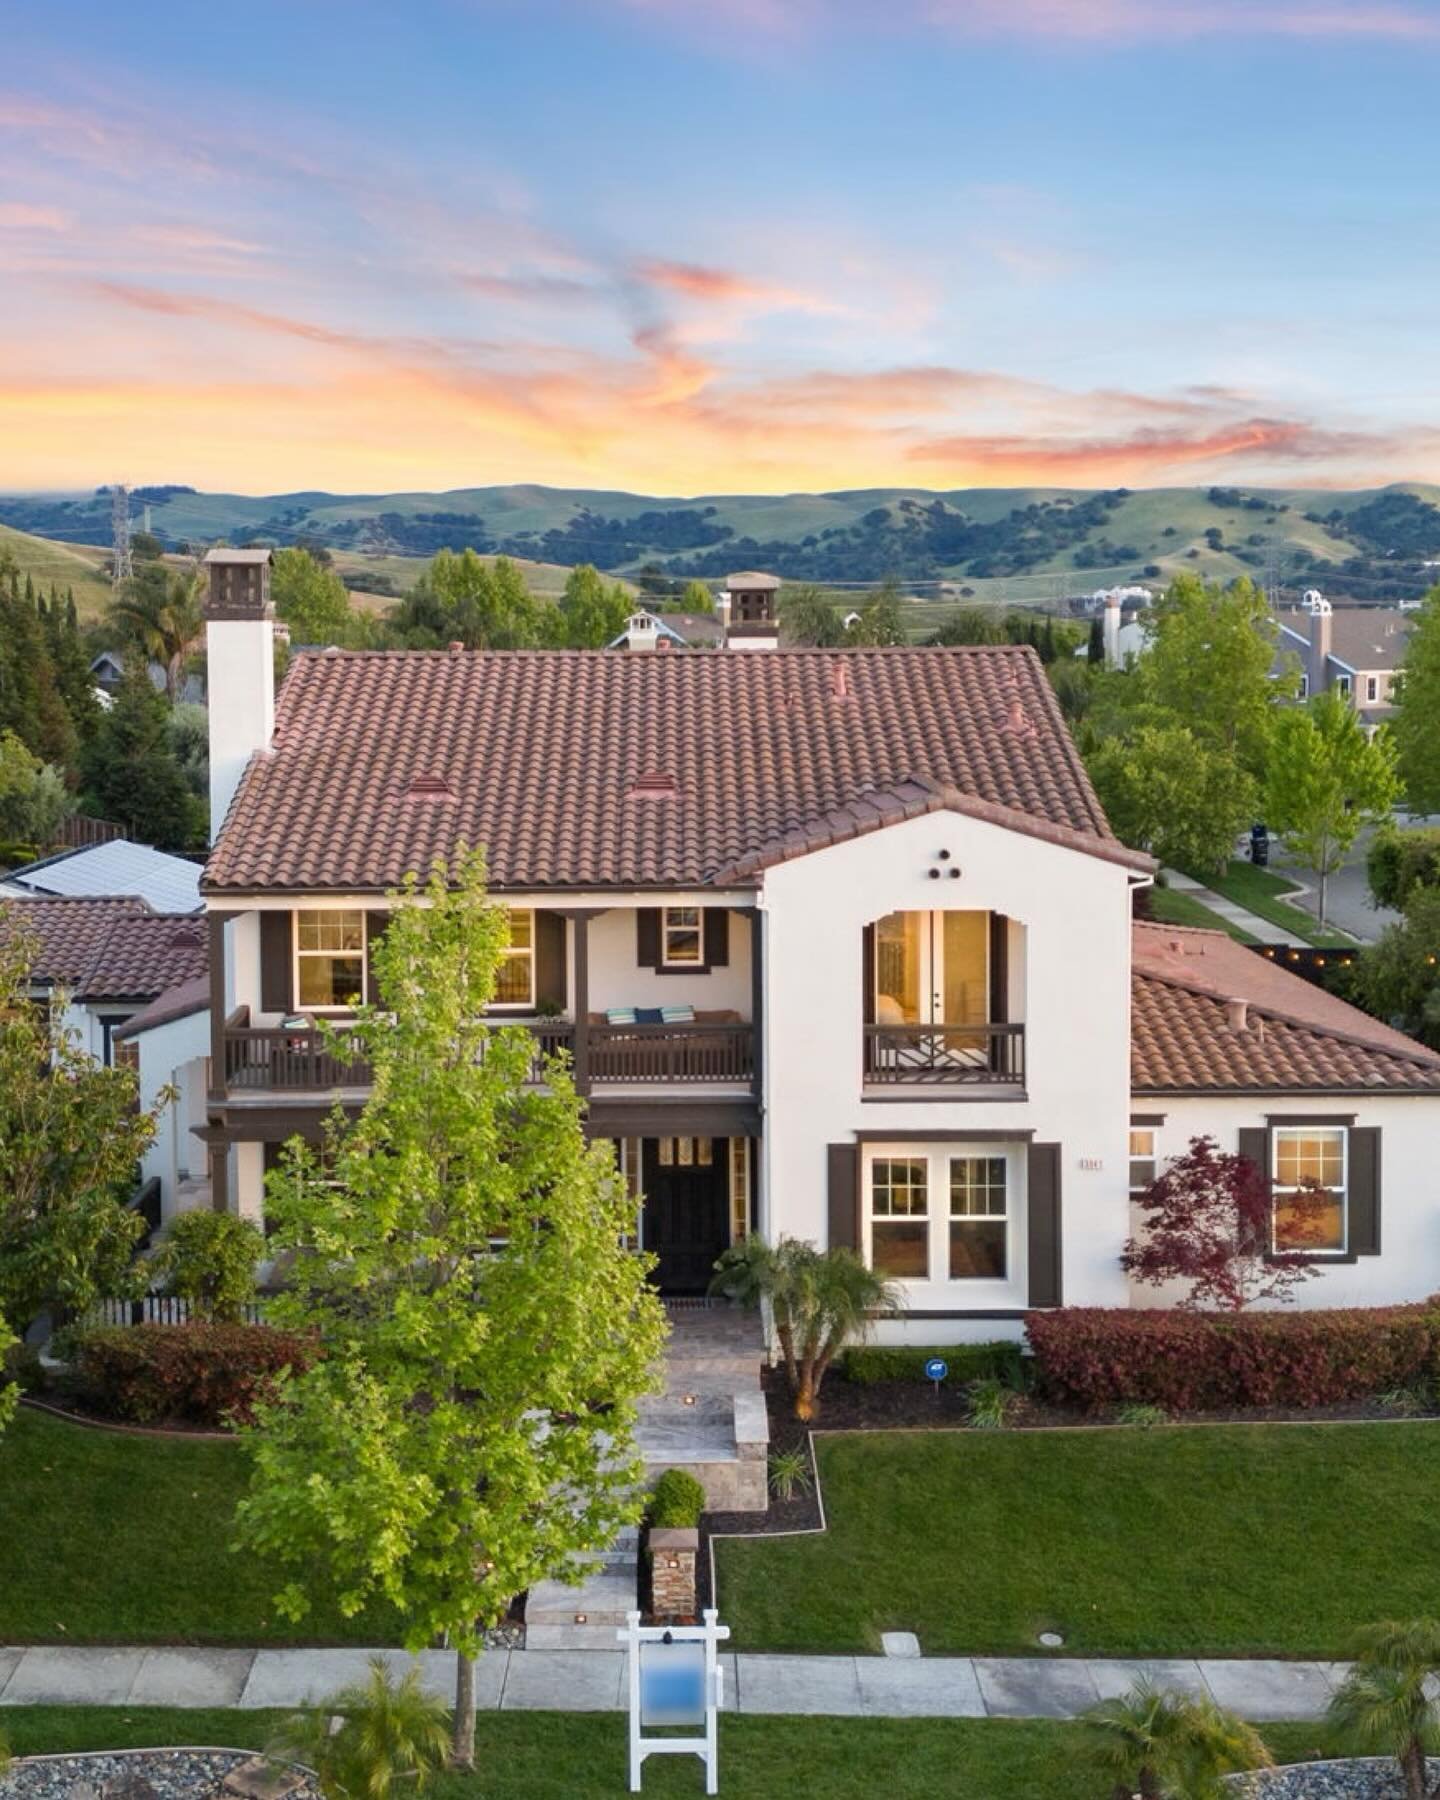 Fell in love with this home!! Down the road from wineries, parks &amp; minutes from downtown Livermore 📸🍷

Always such a pleasure working with @ramosregroup, a fellow husband and wife team! 🫶